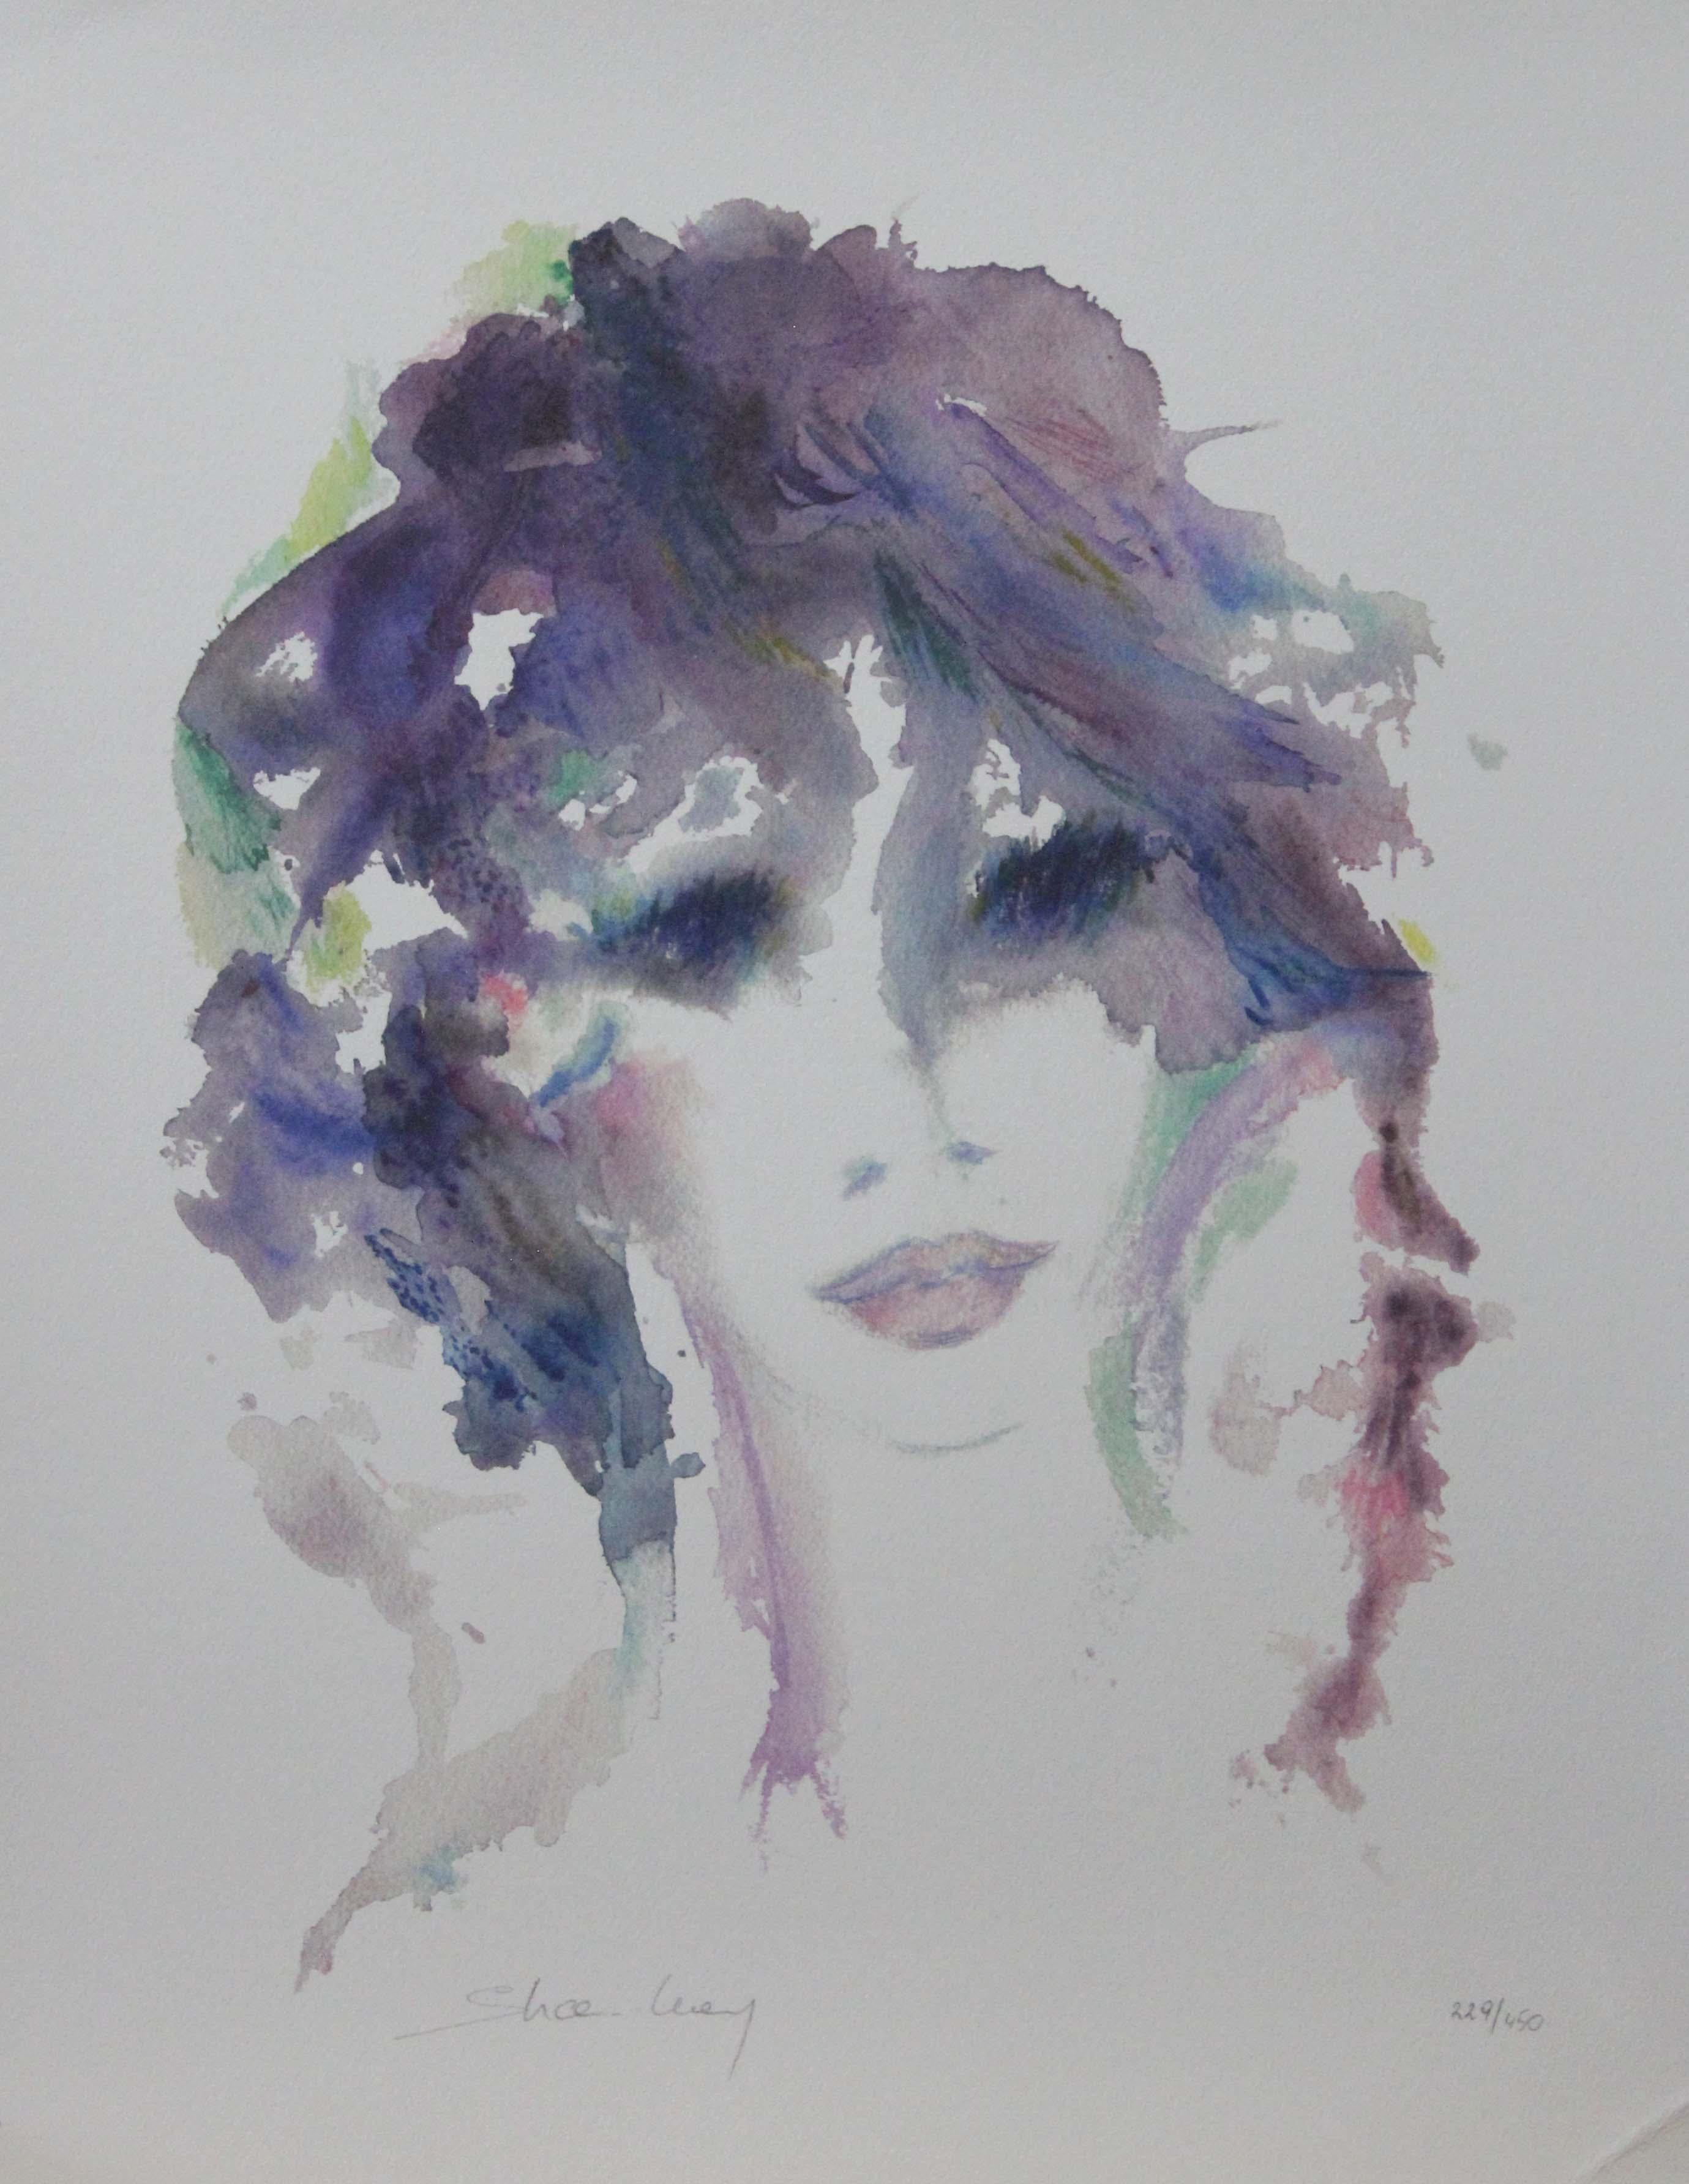 Shan-Merry Figurative Print - "Amethysta" Limited Edition Serigraph (229/450) Pencil-Signed by the Artist